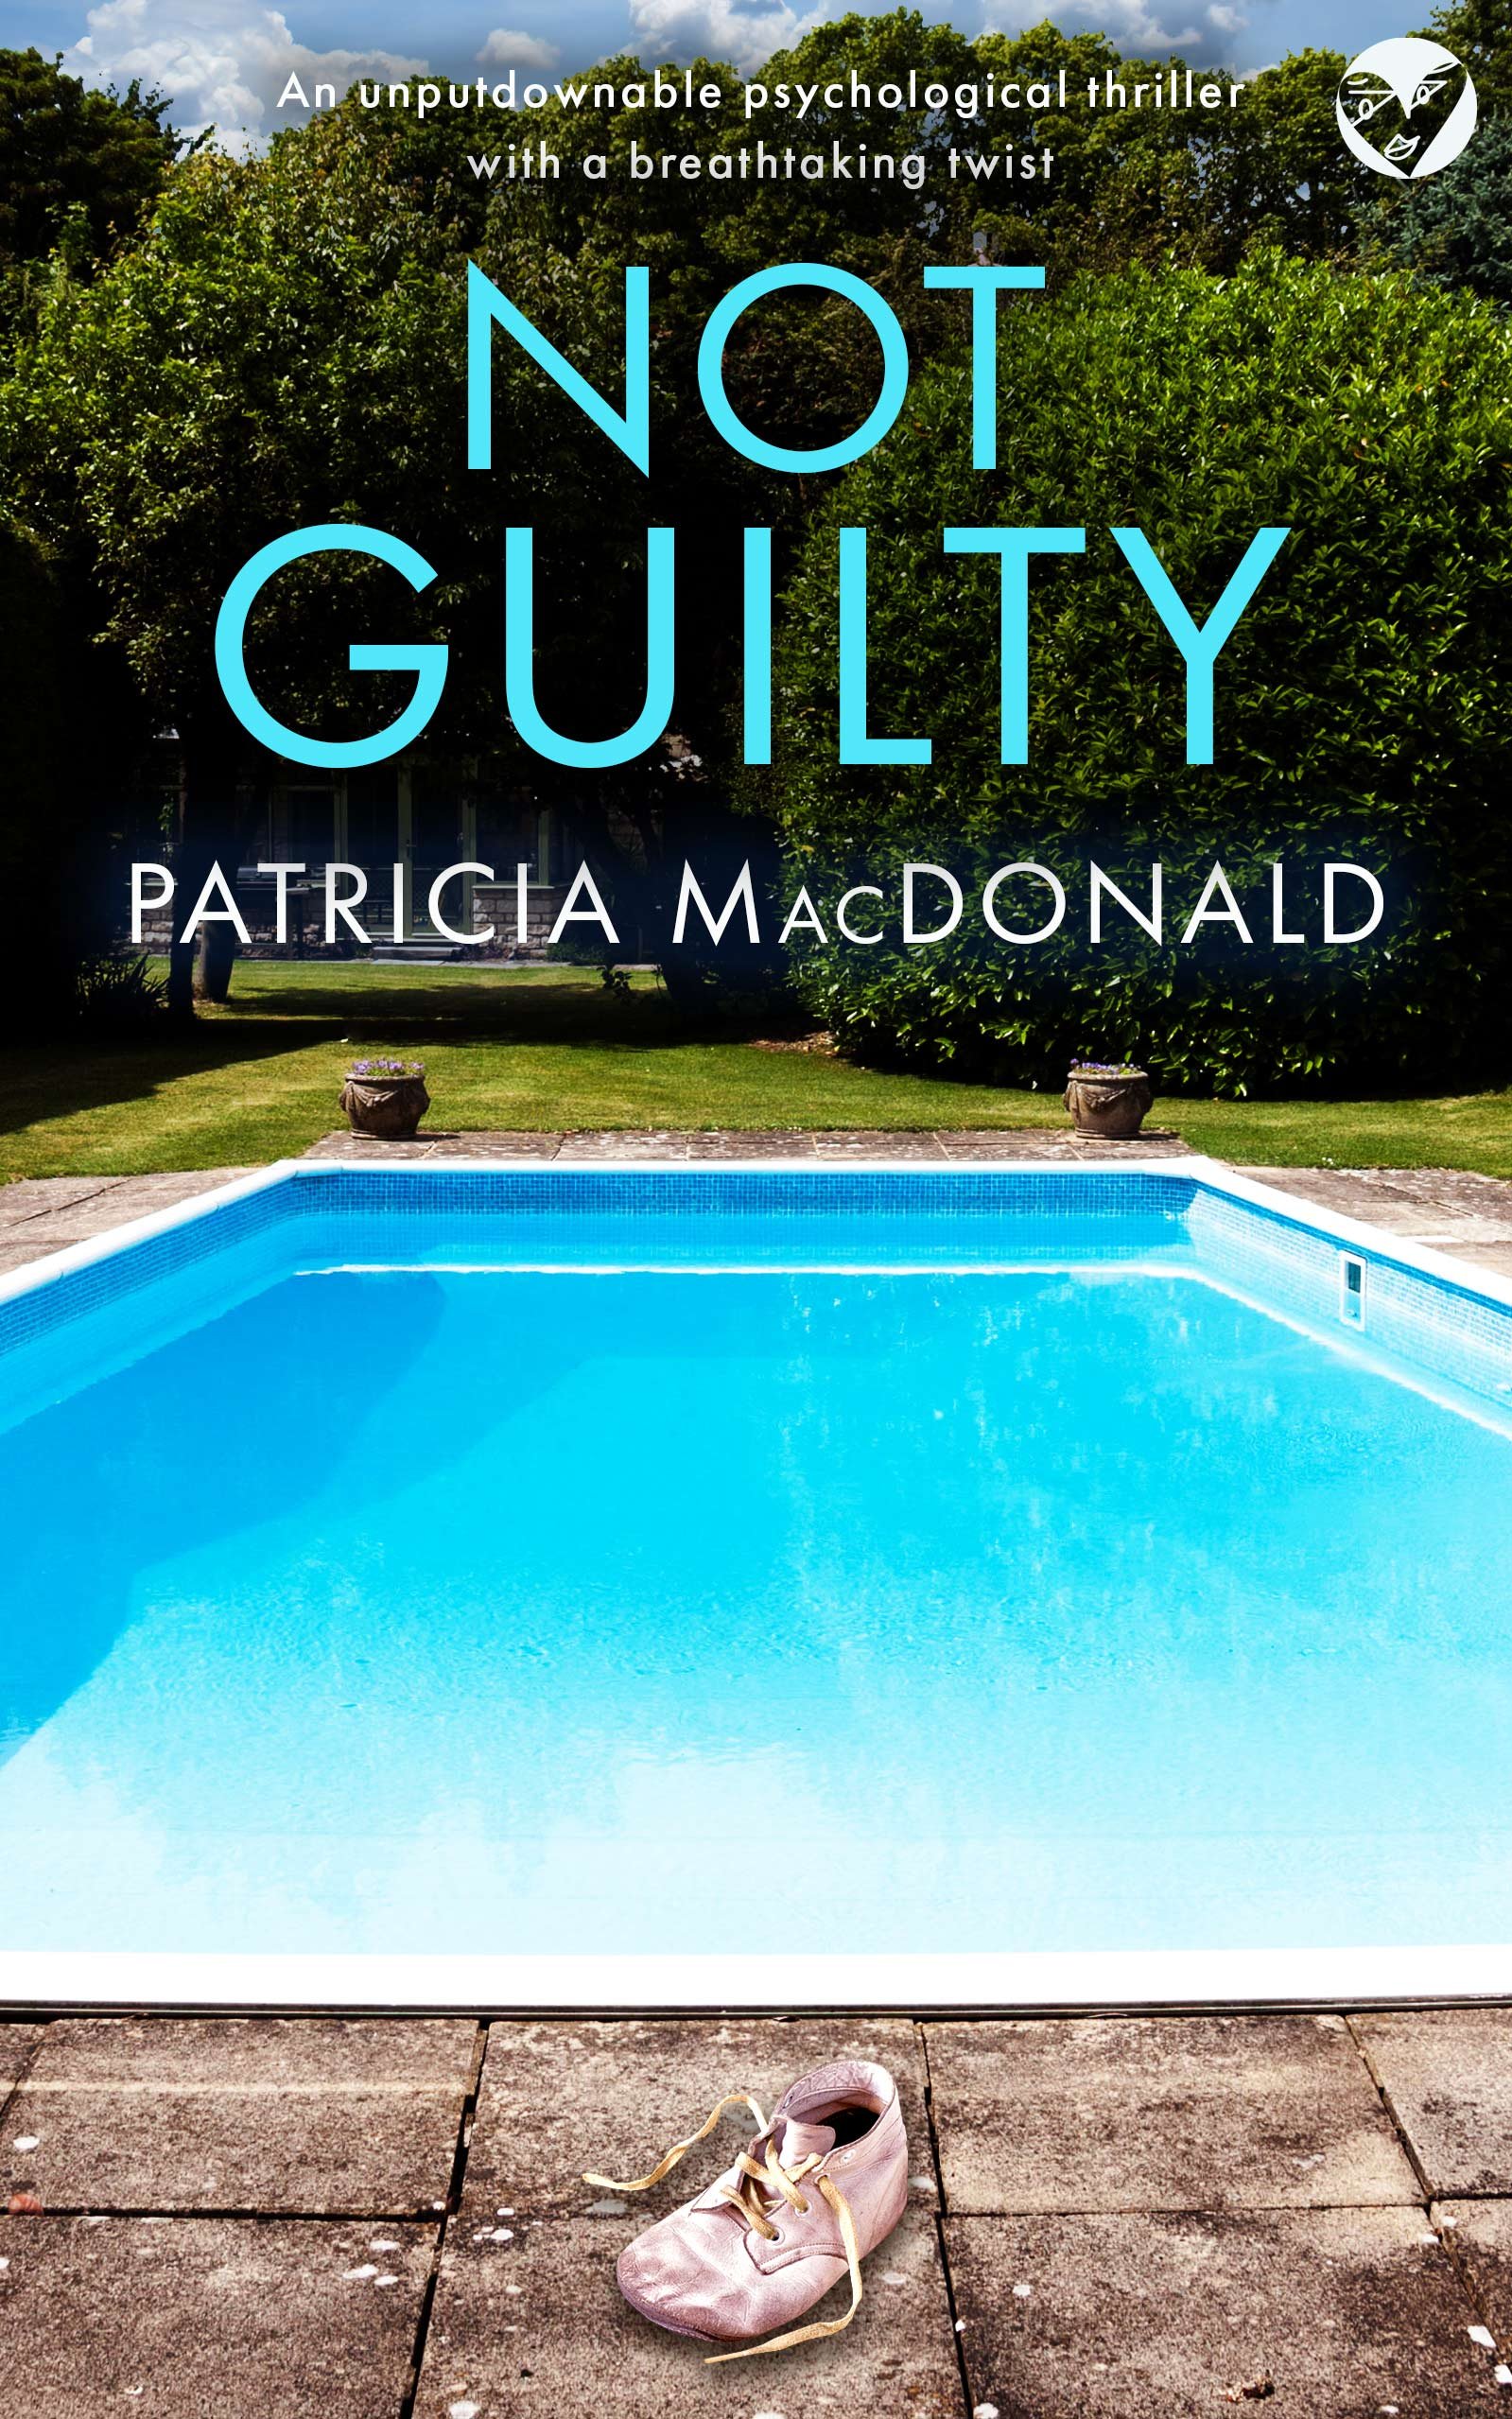 NOT GUILTY Publish cover 627KB.jpg